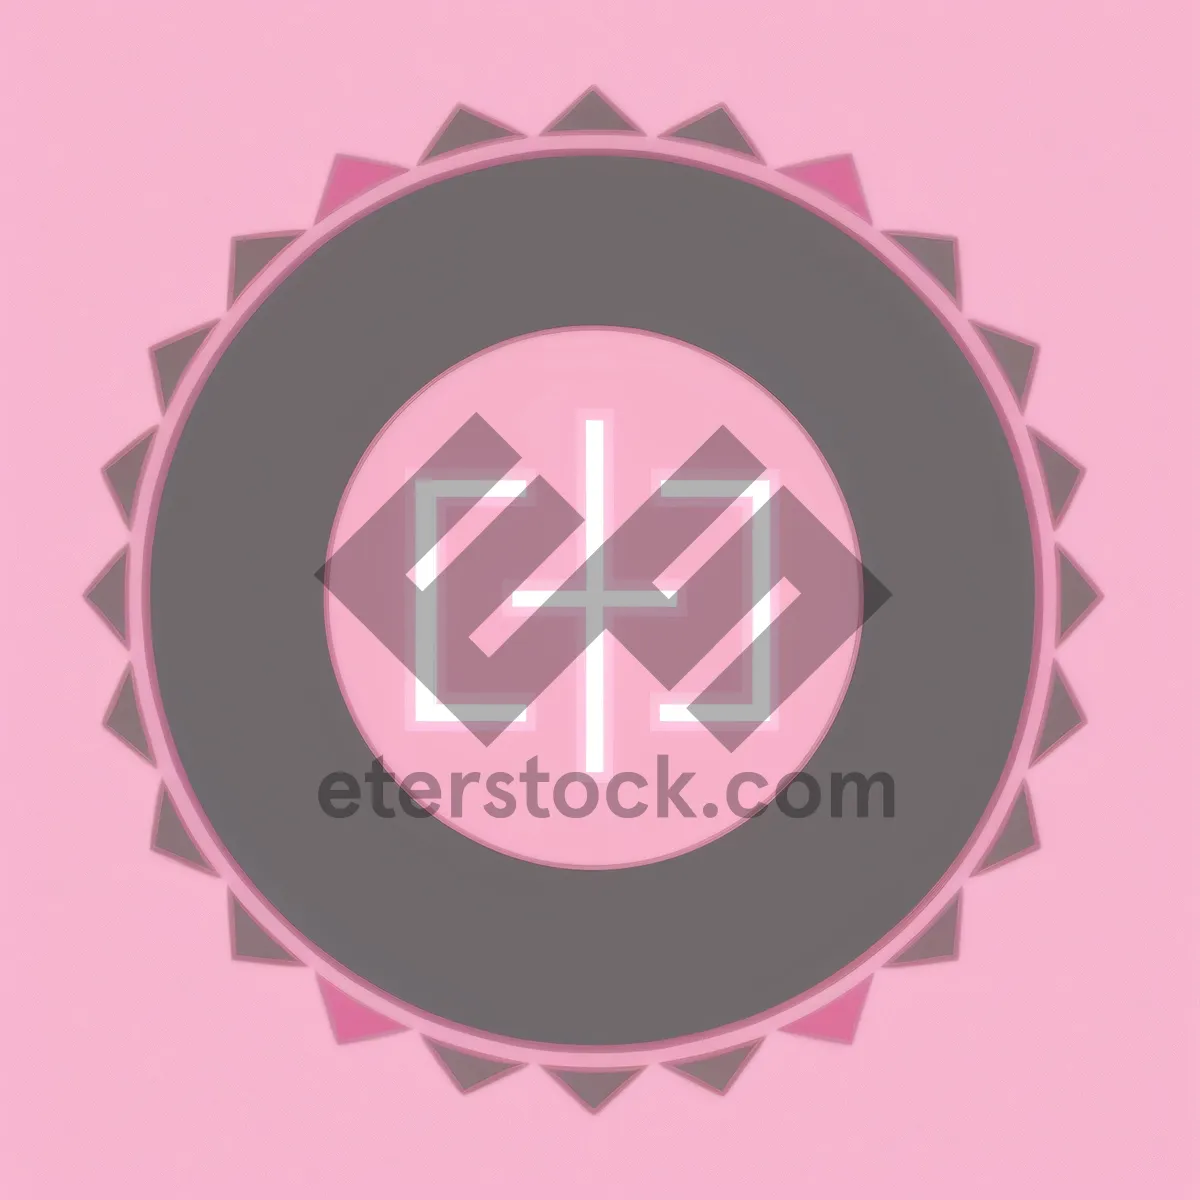 Picture of Glossy Web Design Button Set